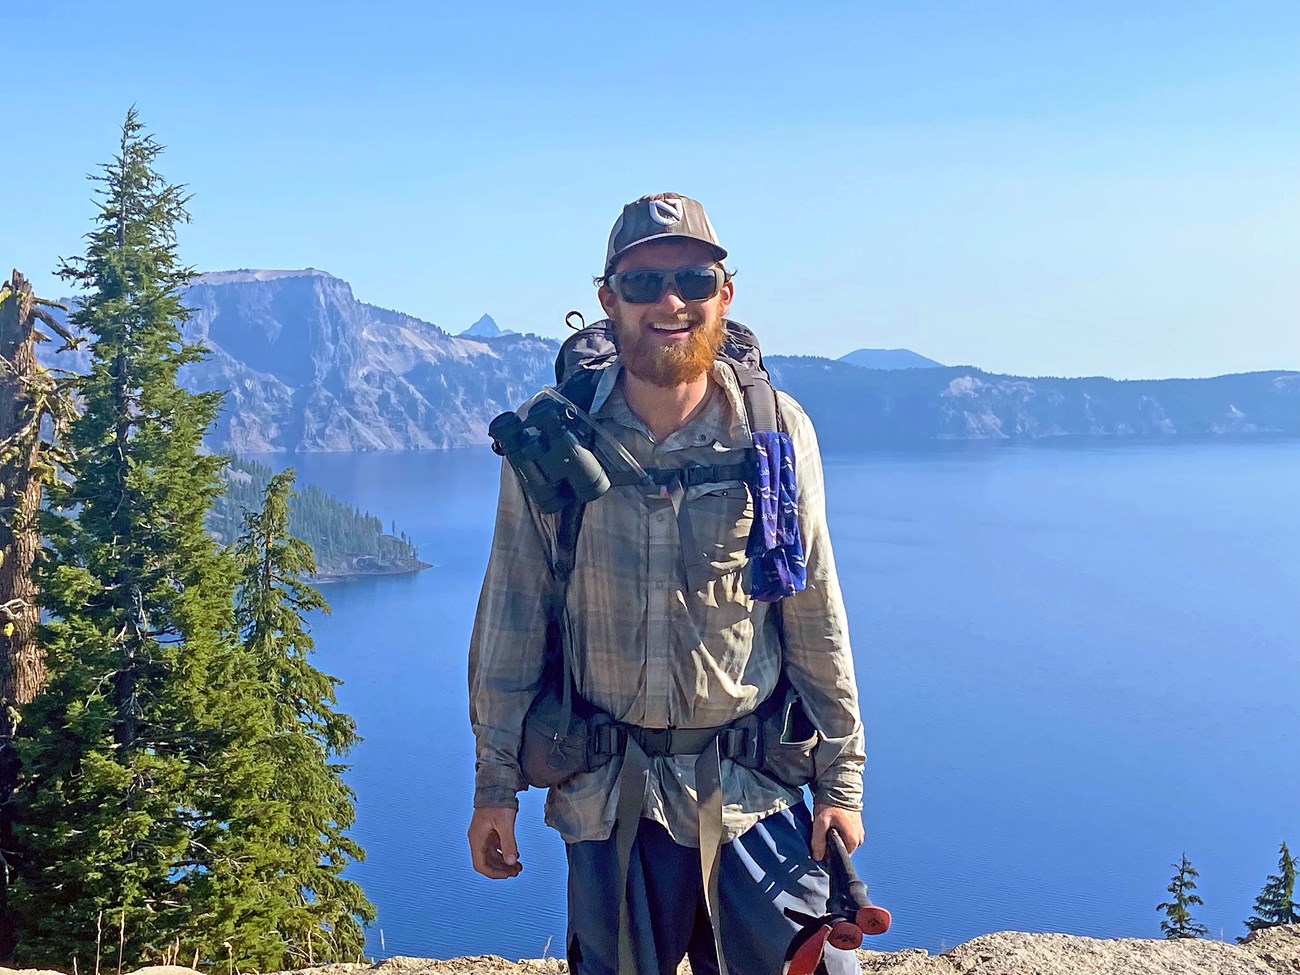 The author, with sunglasses and a beard, smiles for a photo in front of Crater Lake, which appears faded in haze from wildfire smoke. He carries a large backpacking pack, binoculars, and a pair of hicking poles.